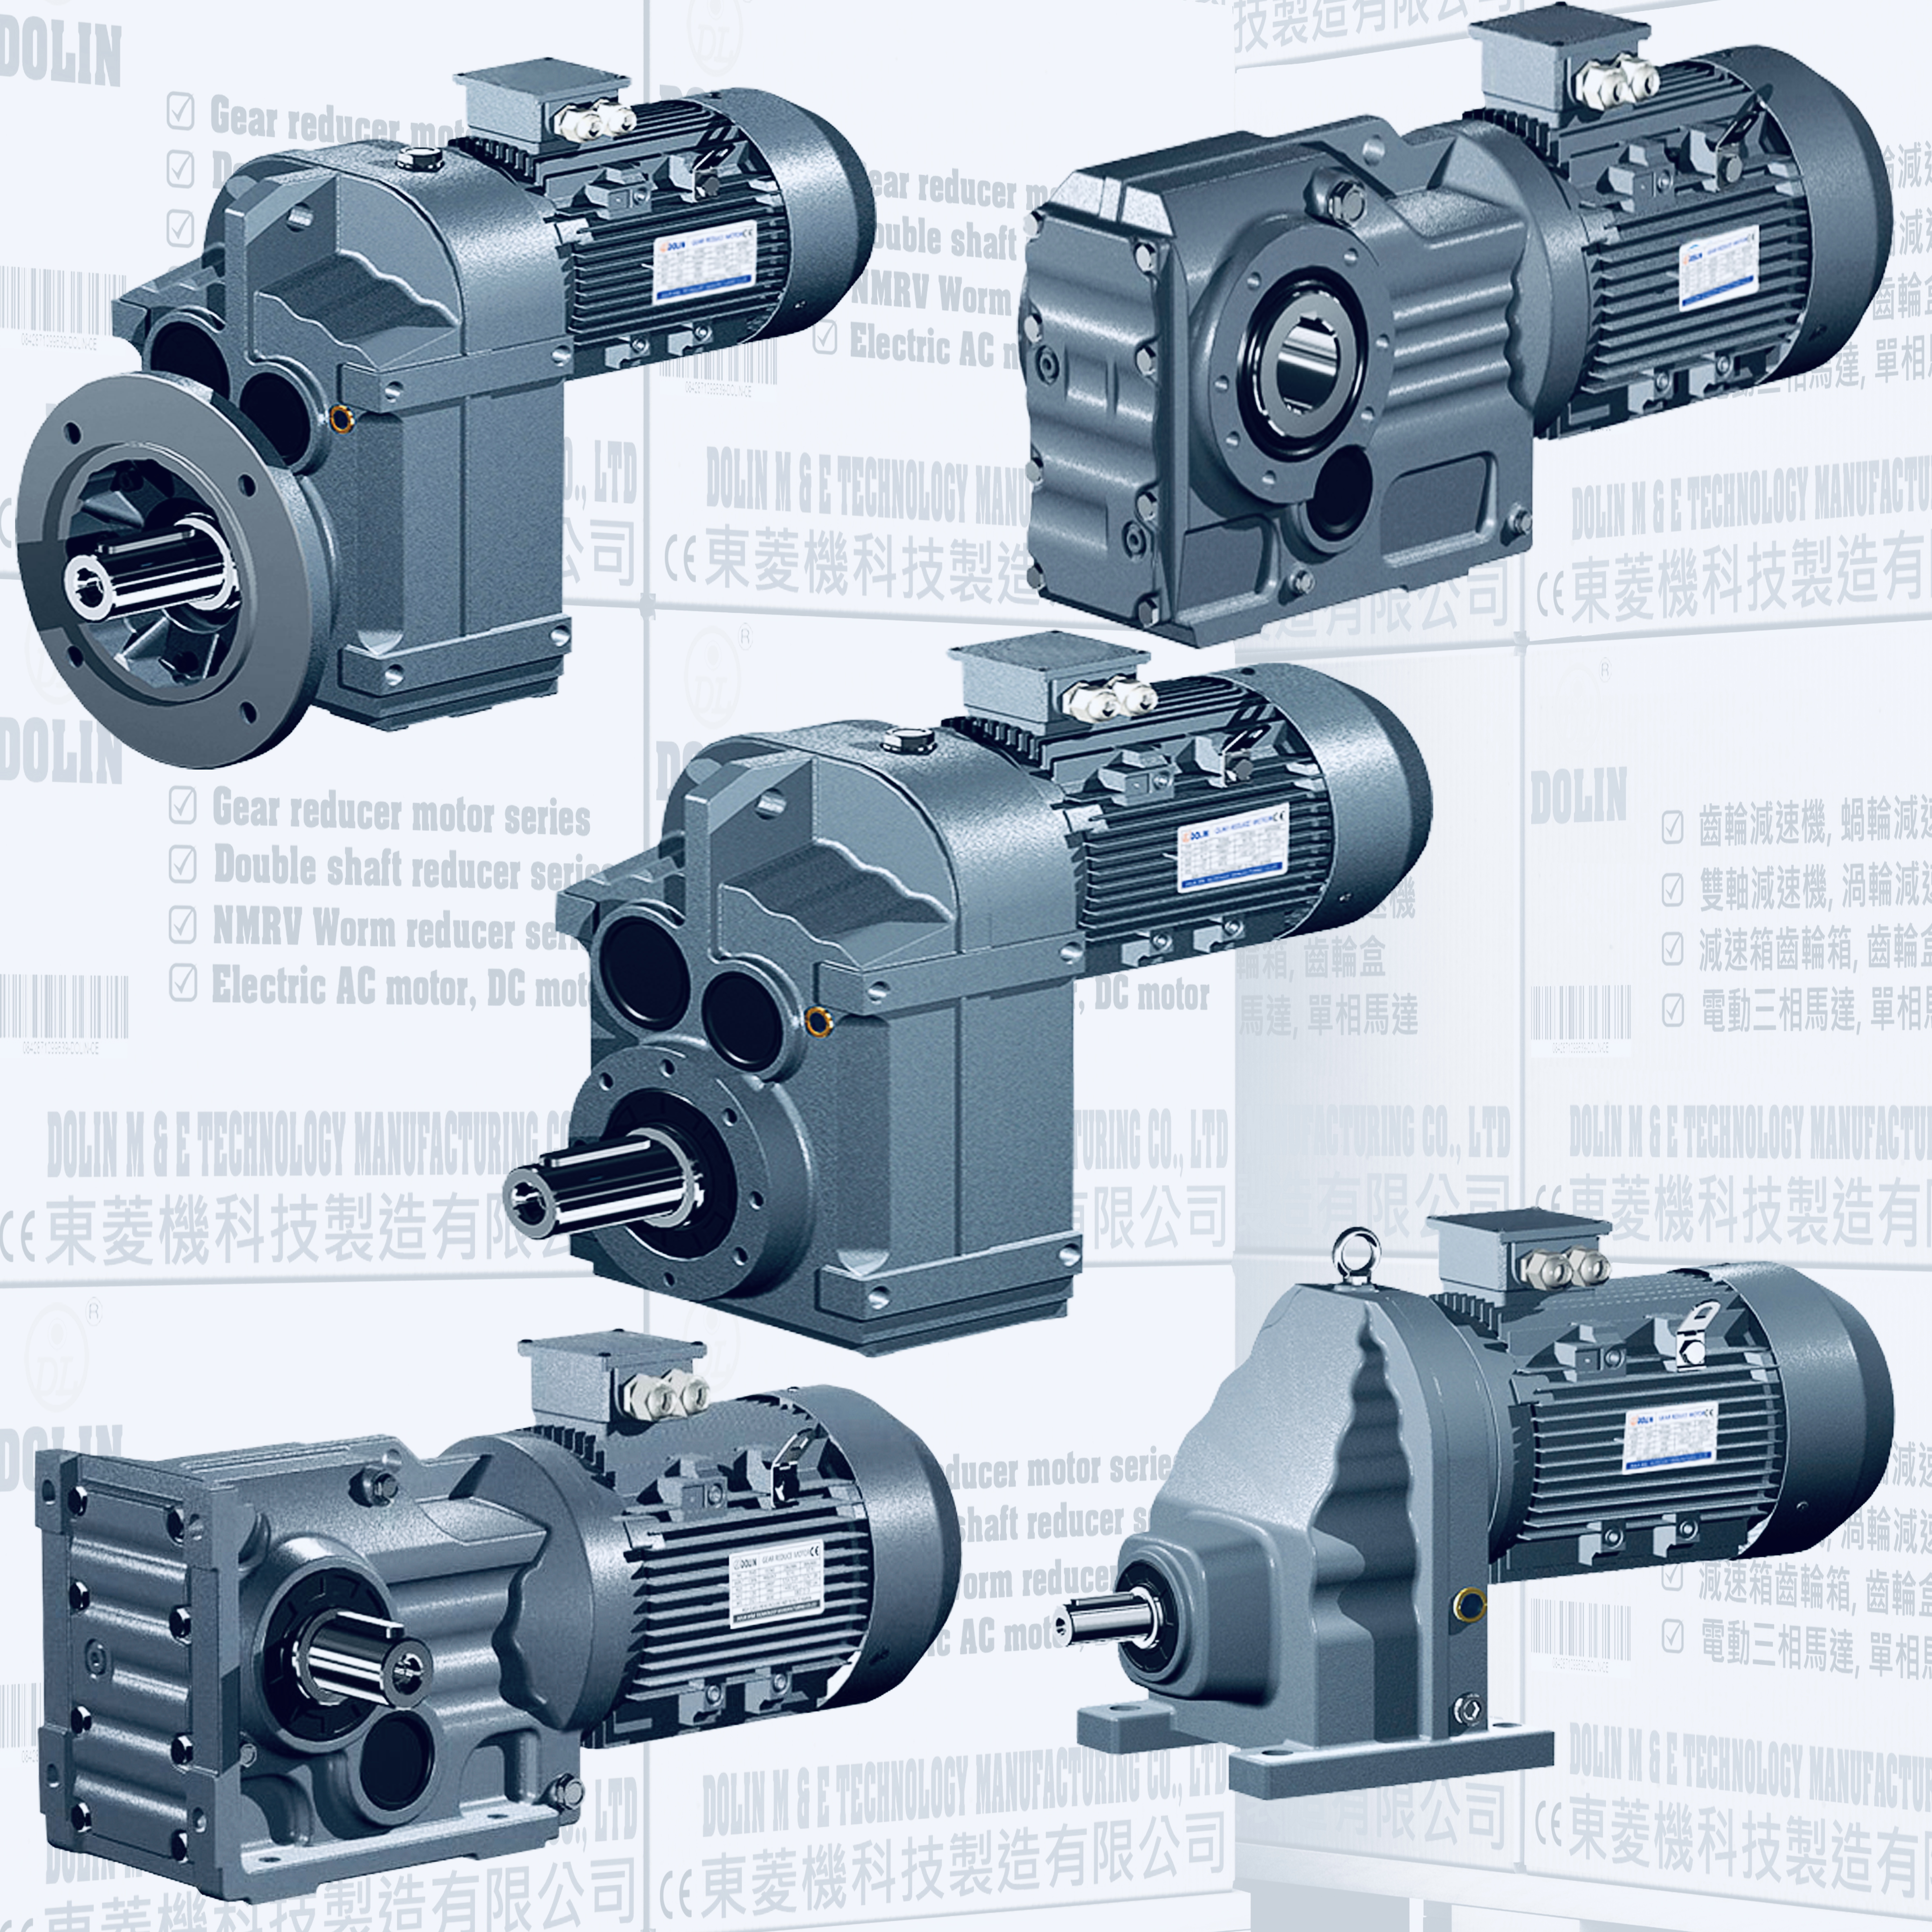 Precision planetary gear reducer introduction